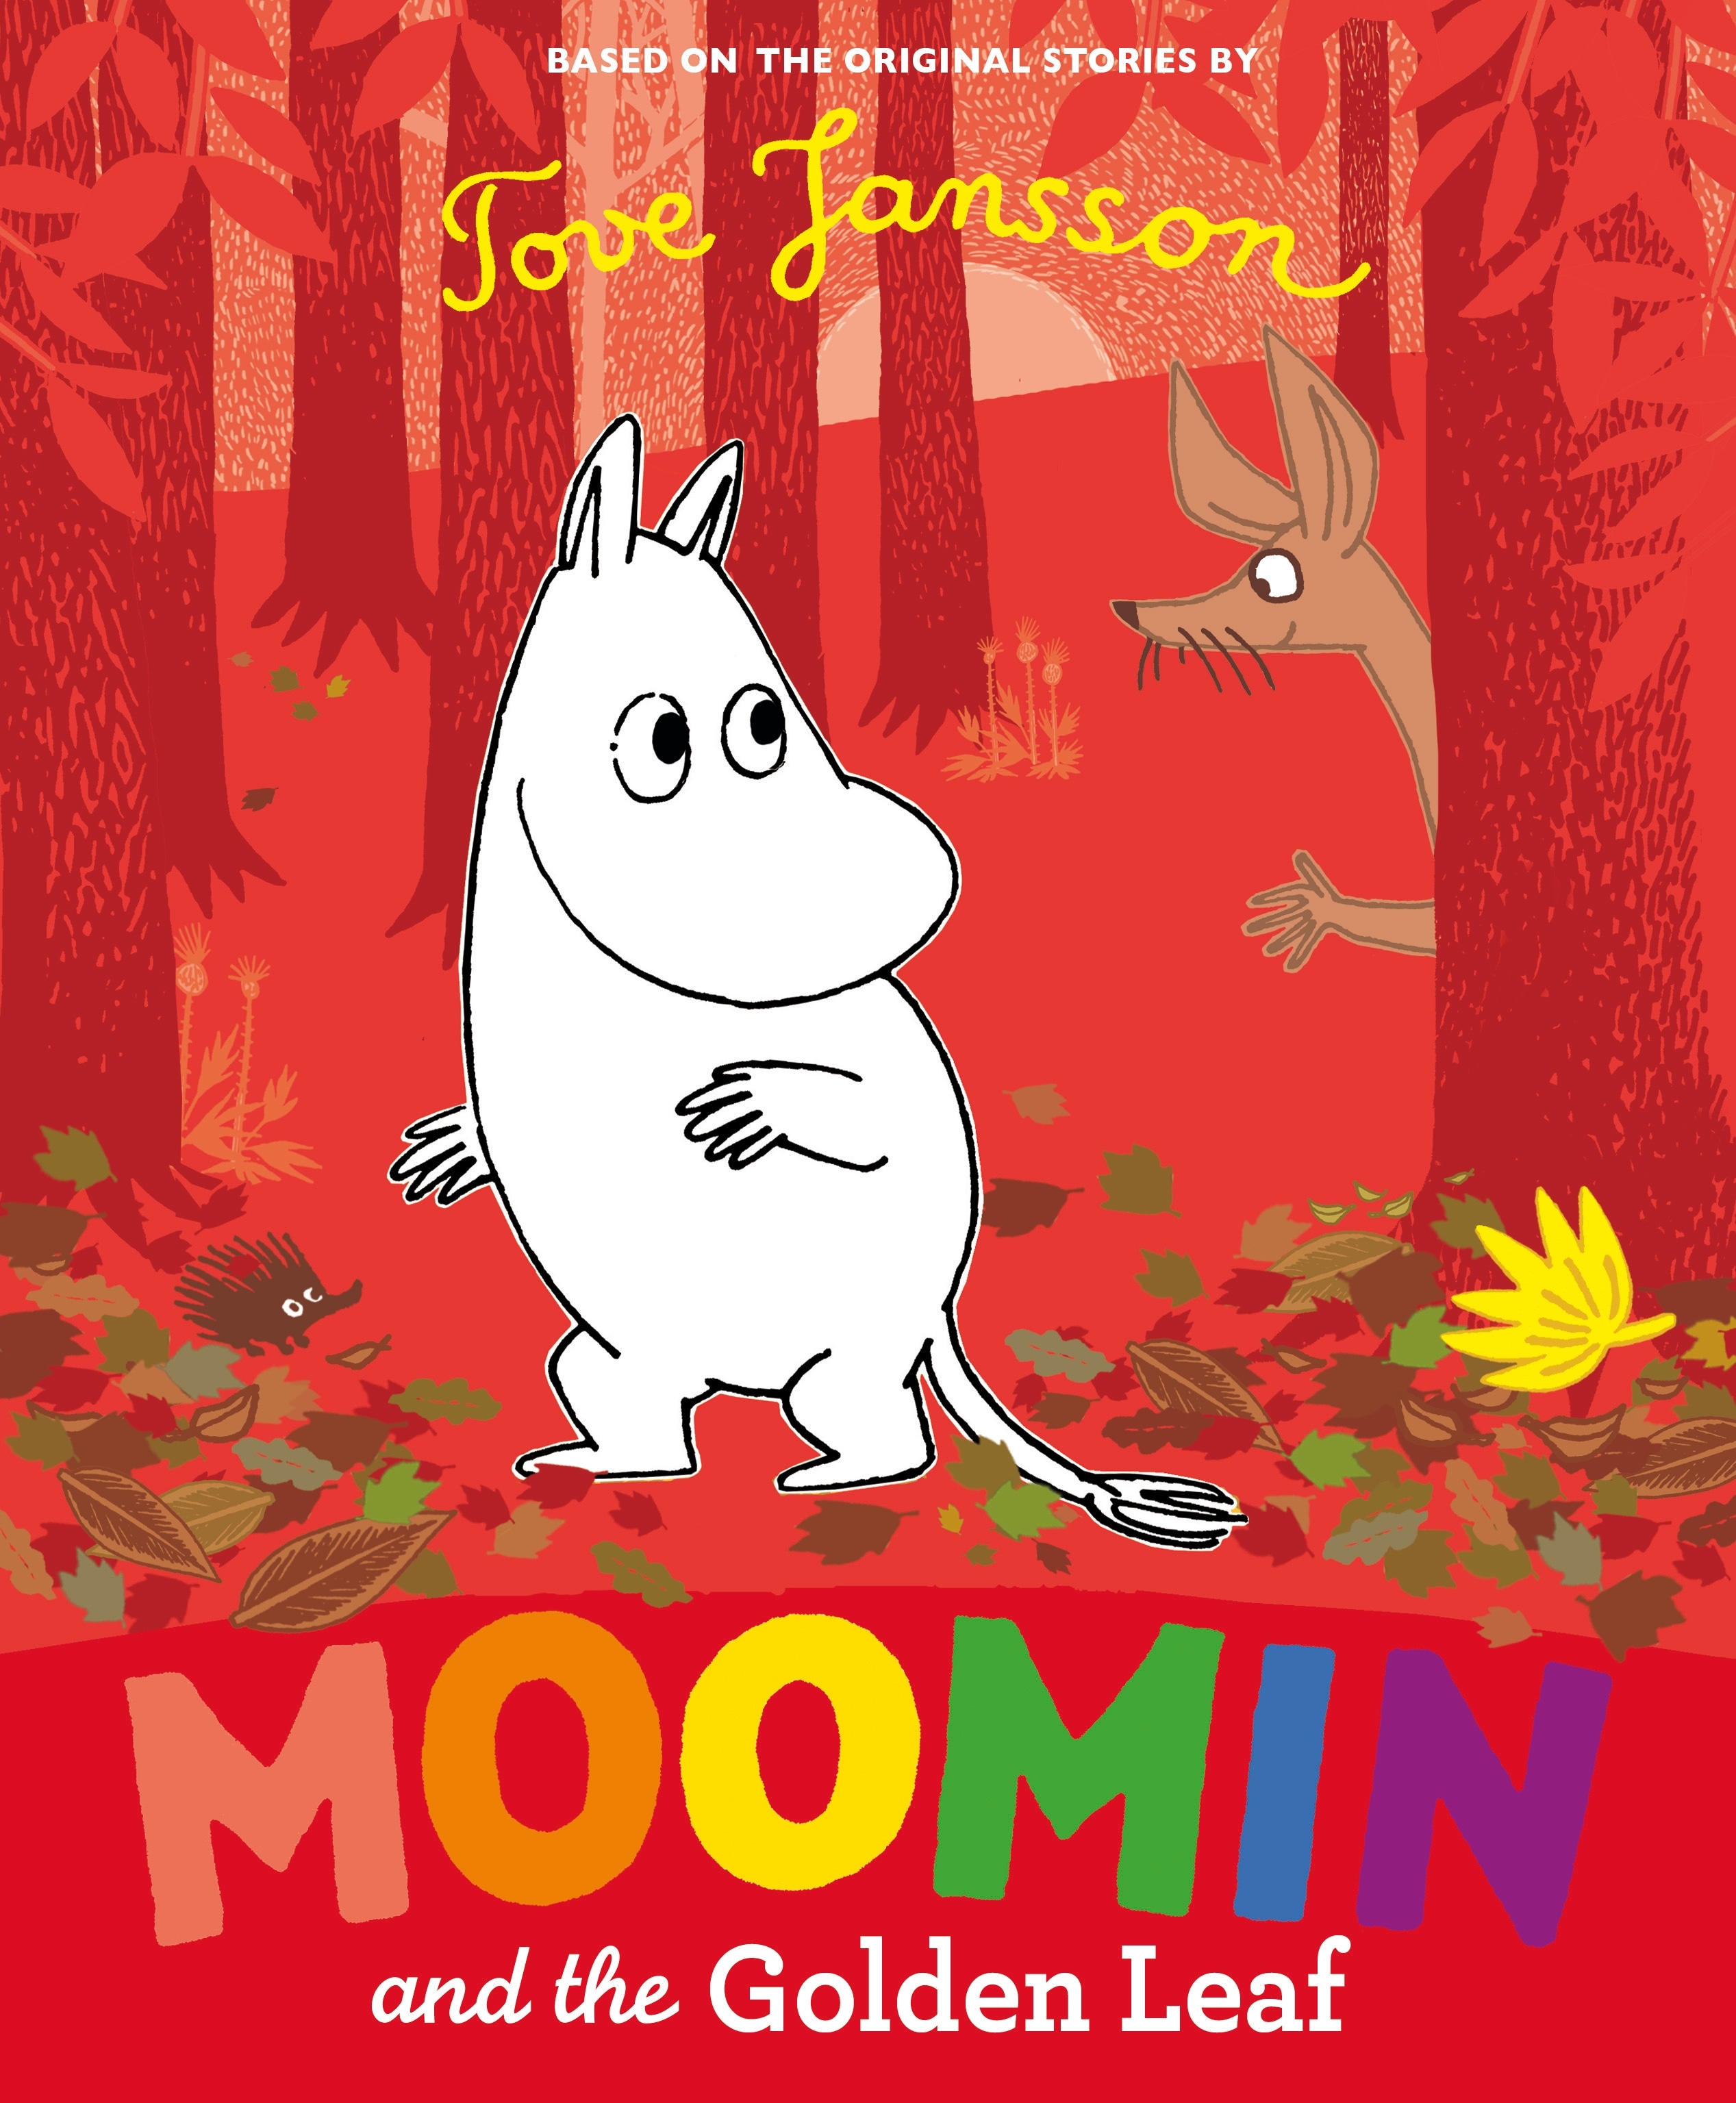 Book “Moomin and the Golden Leaf” by Tove Jansson — September 5, 2019